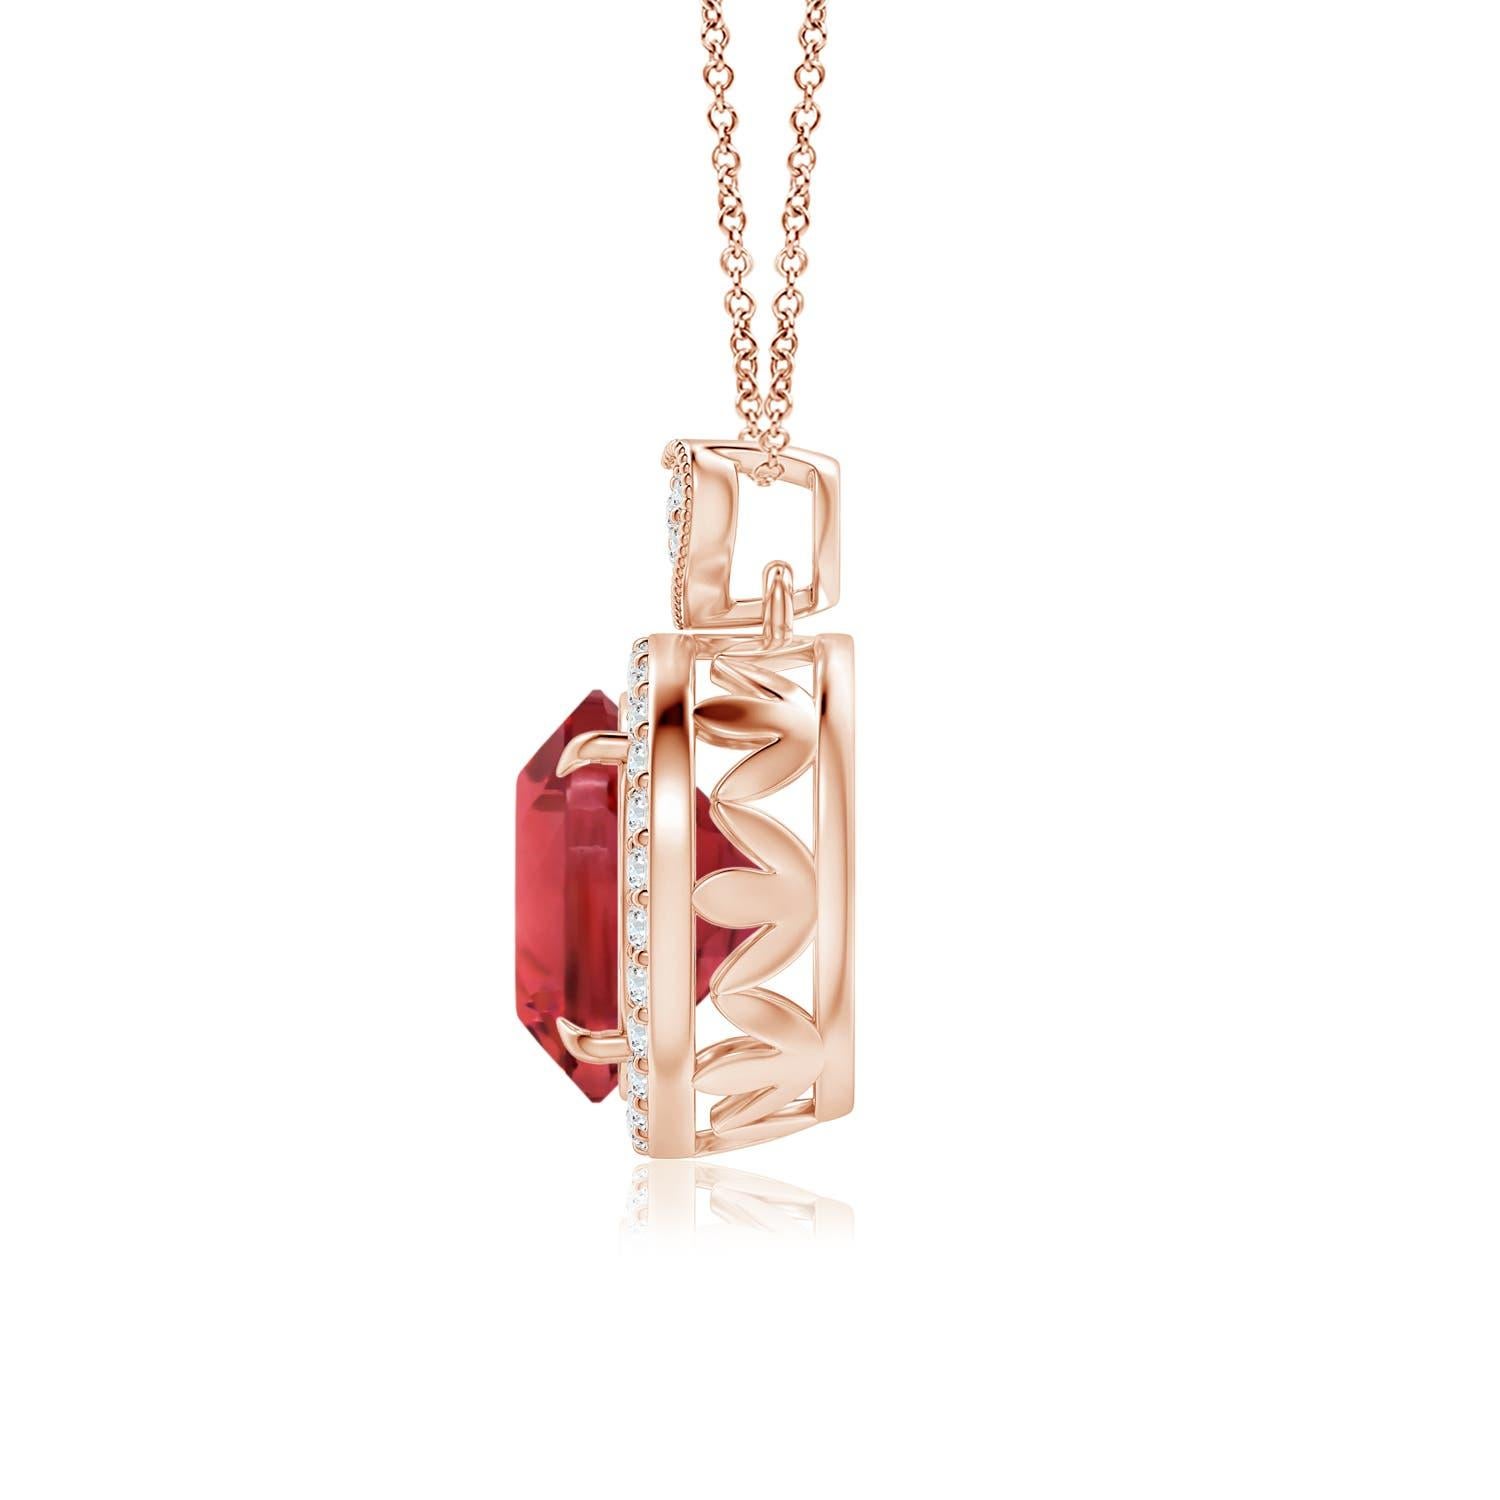 Embrace your romantic side with this charming pink tourmaline pendant, crafted in 18k rose gold. The GIA certified pink tourmaline is claw-set within a halo of sparkling diamonds. It is topped with a diamond-encrusted heart-shaped bale, fringed with